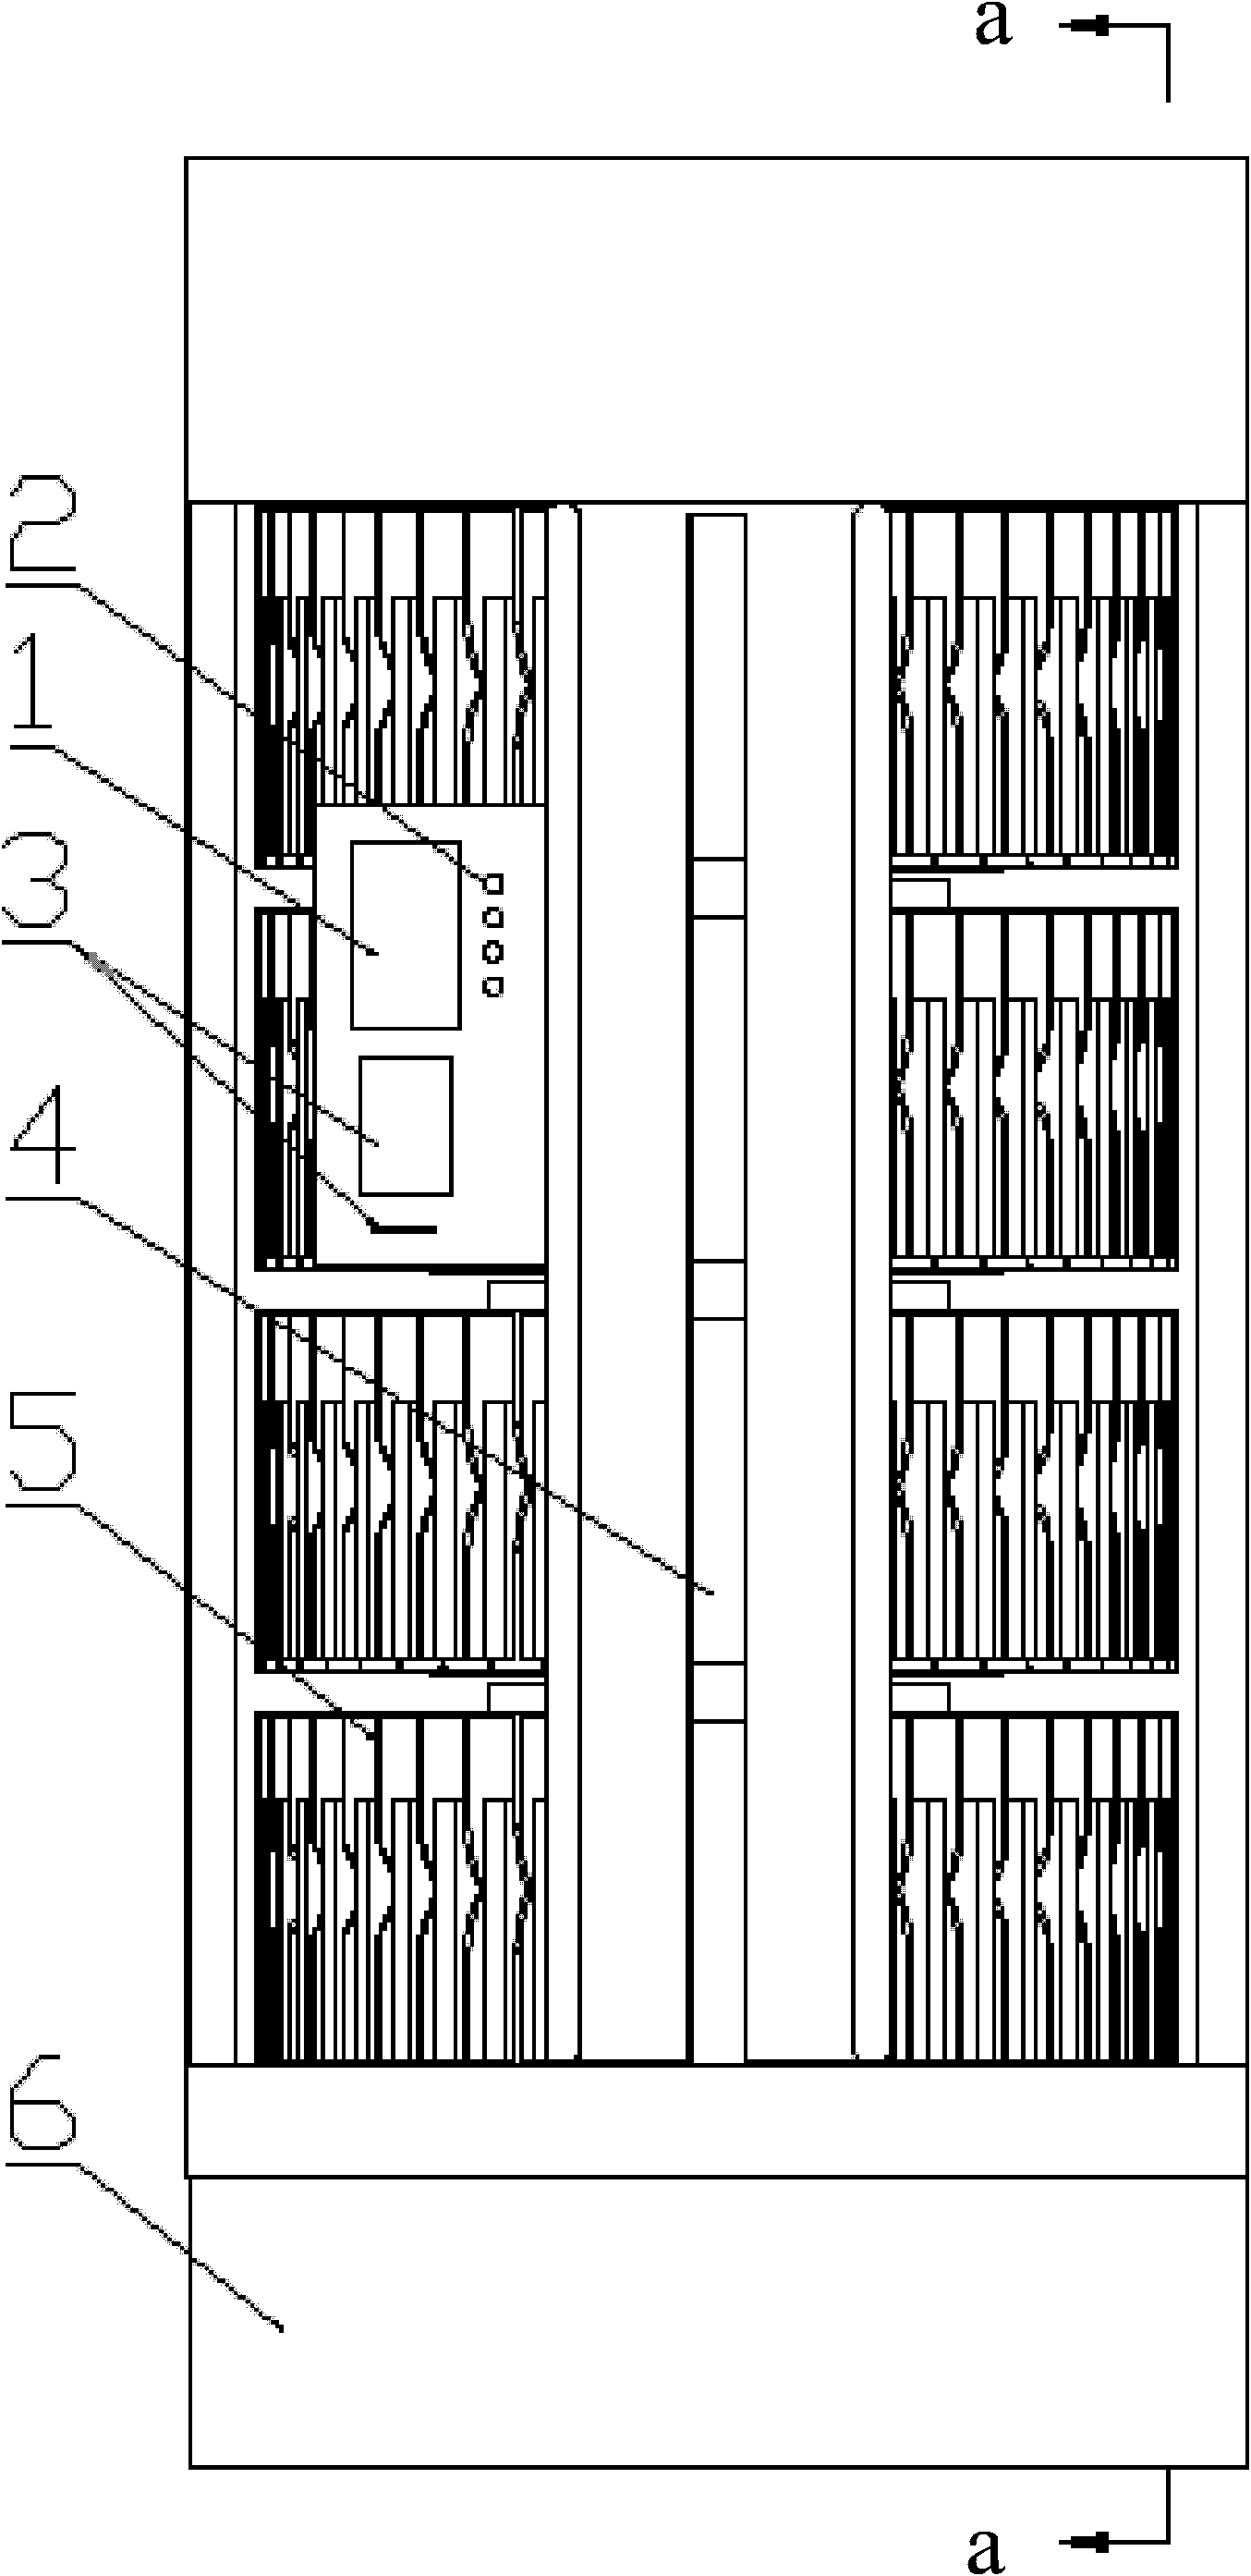 Self-service storage-extraction device